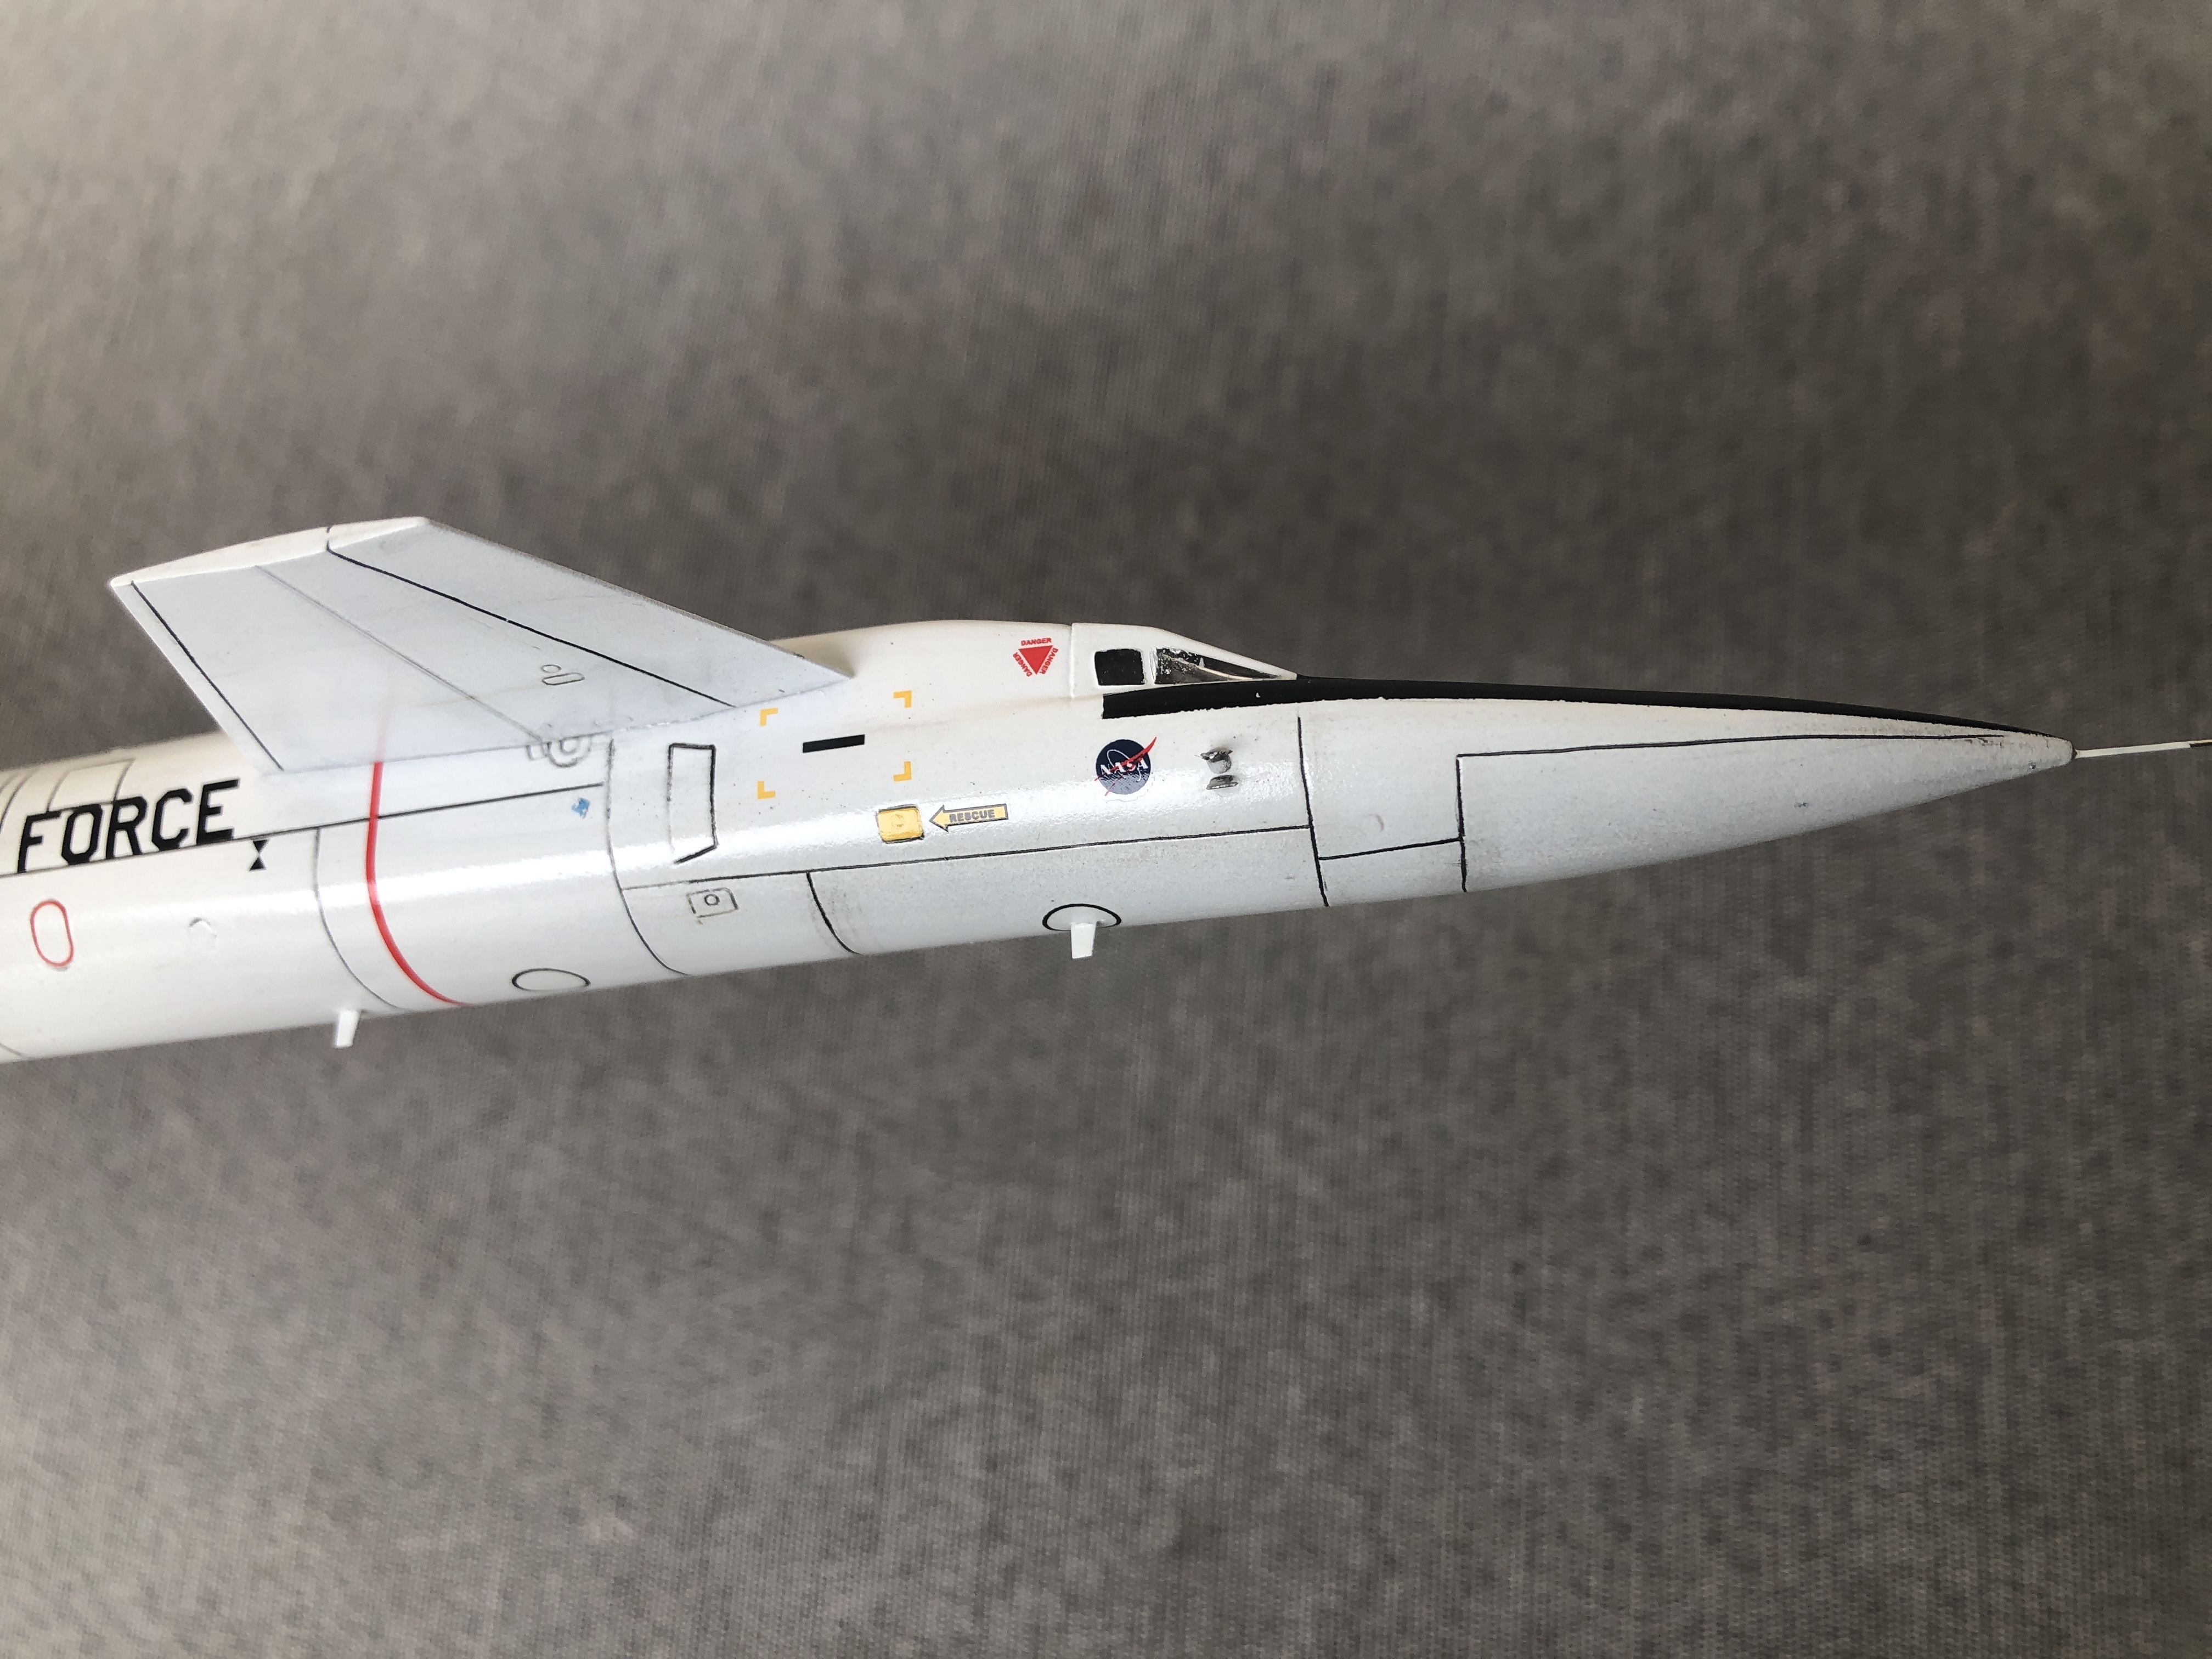 [ARMORY] North American XB-70 Valkyrie  1/144 2eds